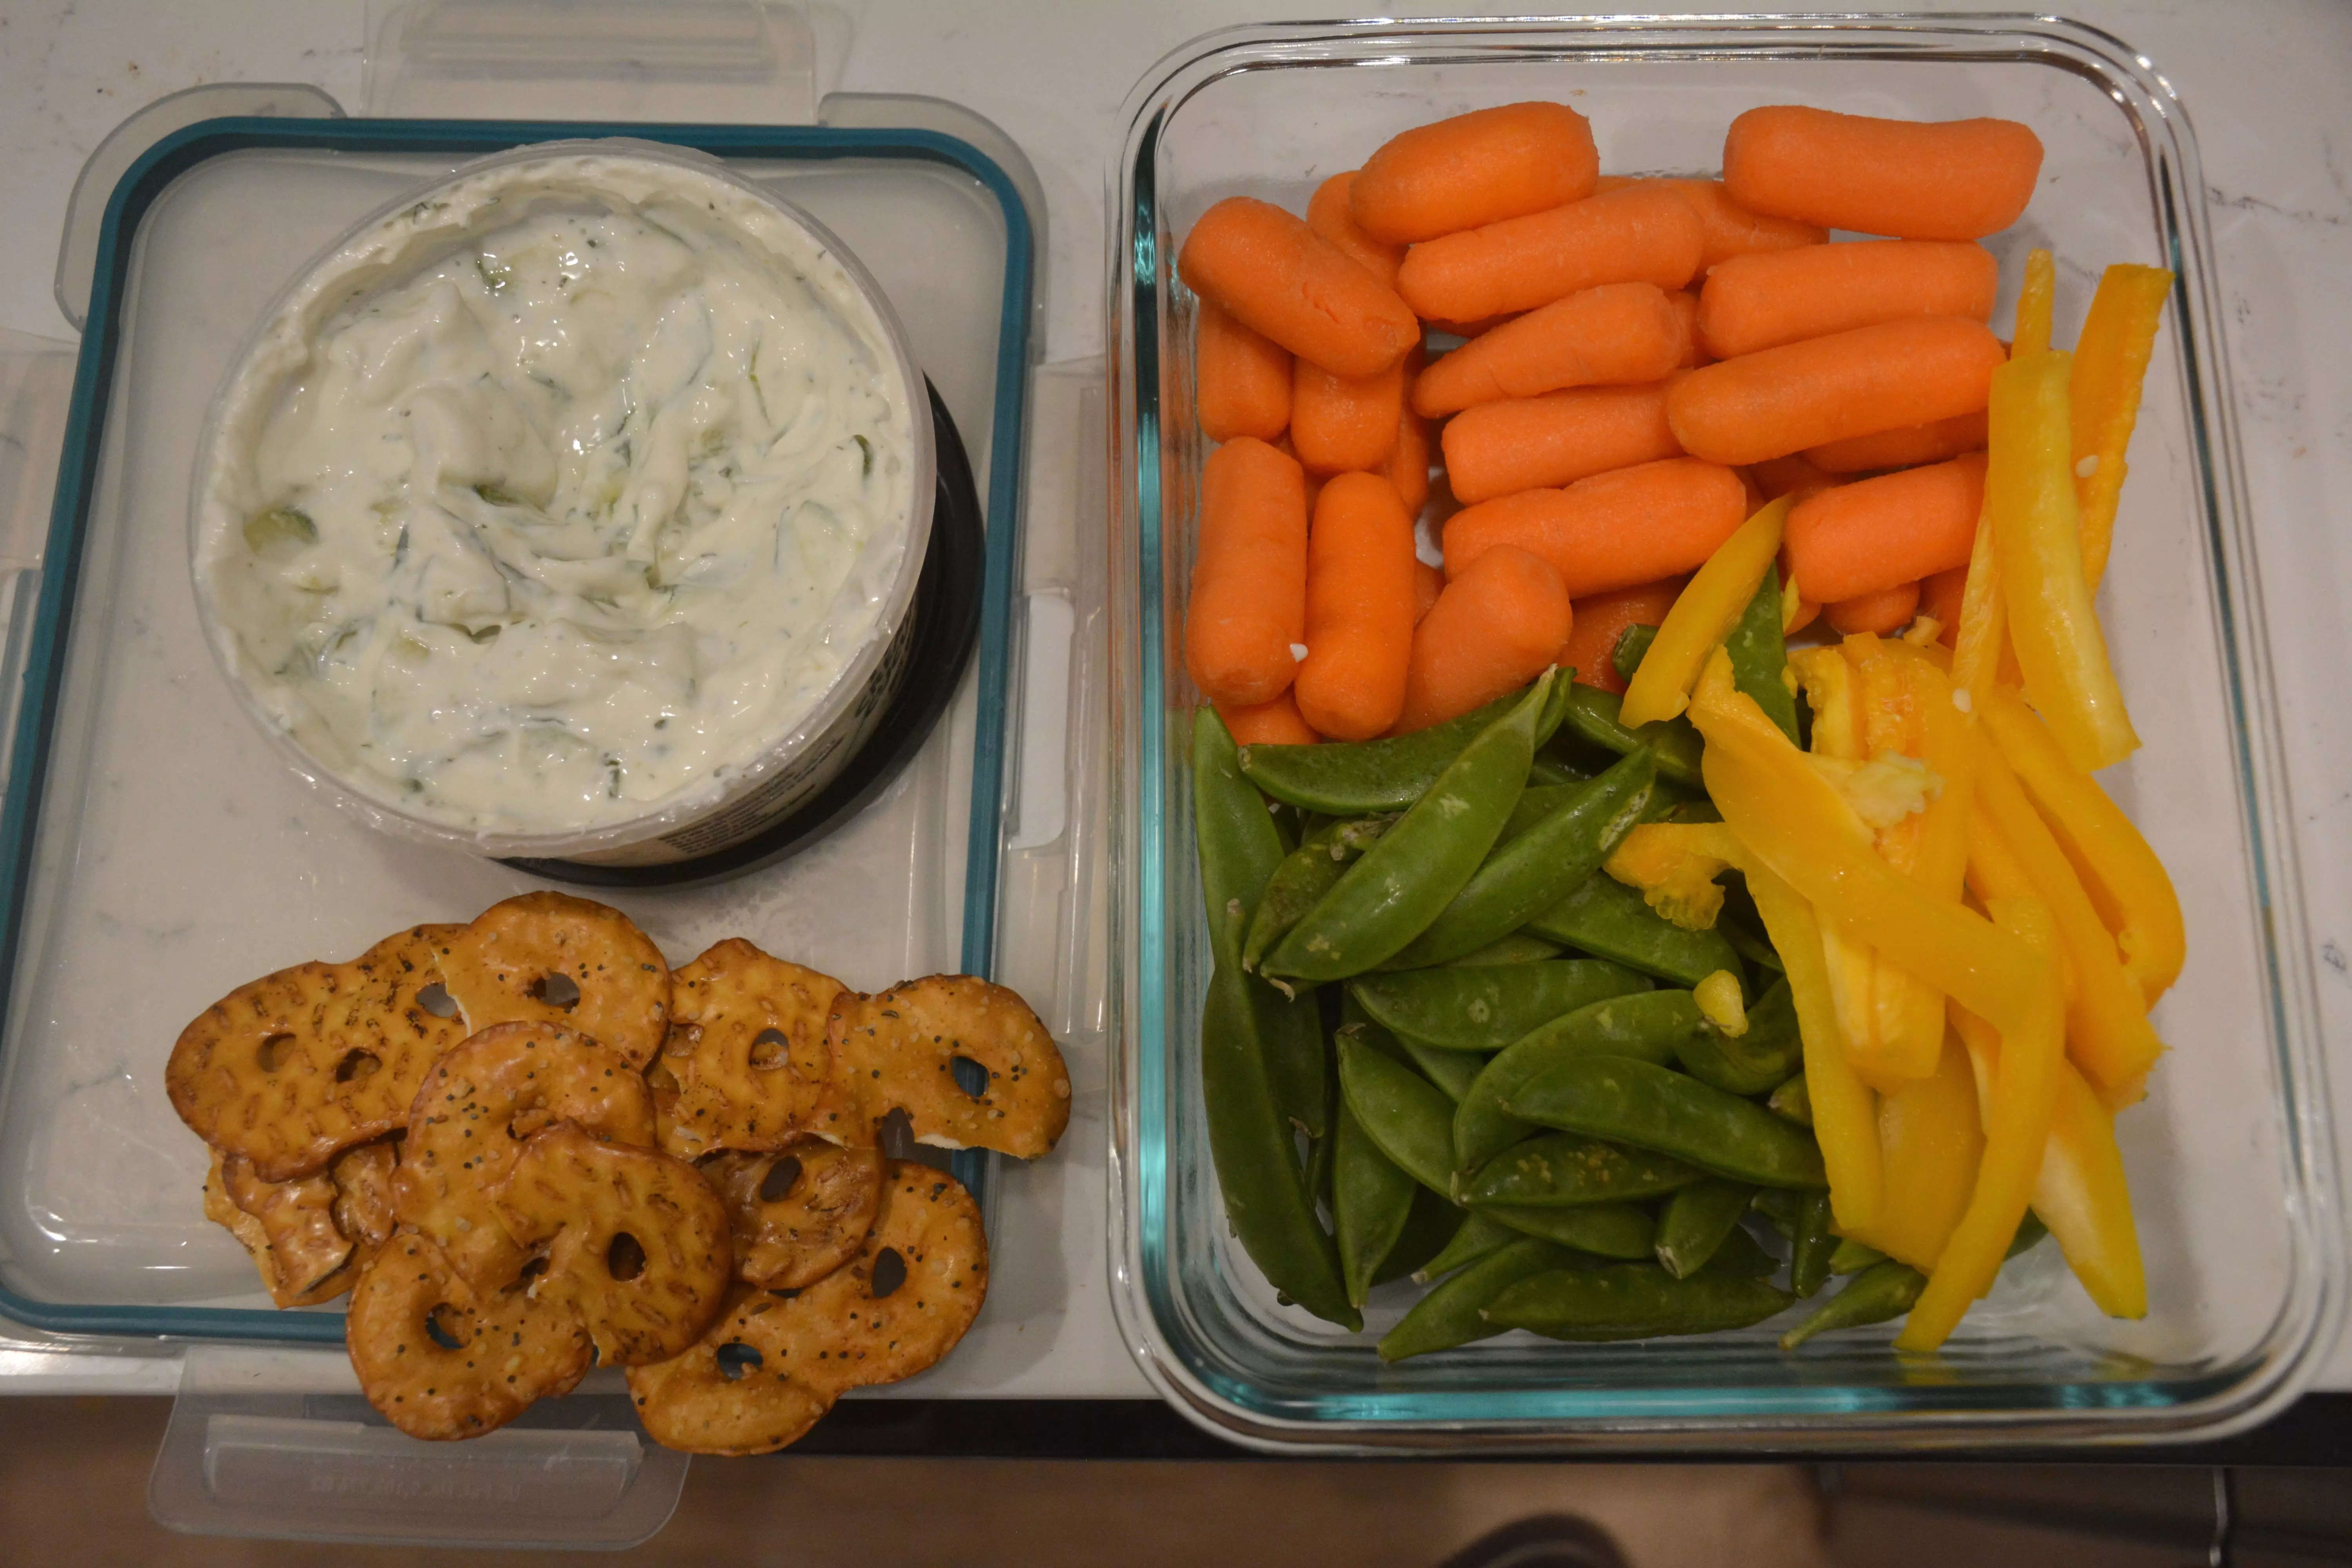 Tupperware of ready-to-eat veggies, including carrots, snap peas and yellow bell pepper, next to tzatziki and pretzel crisps.